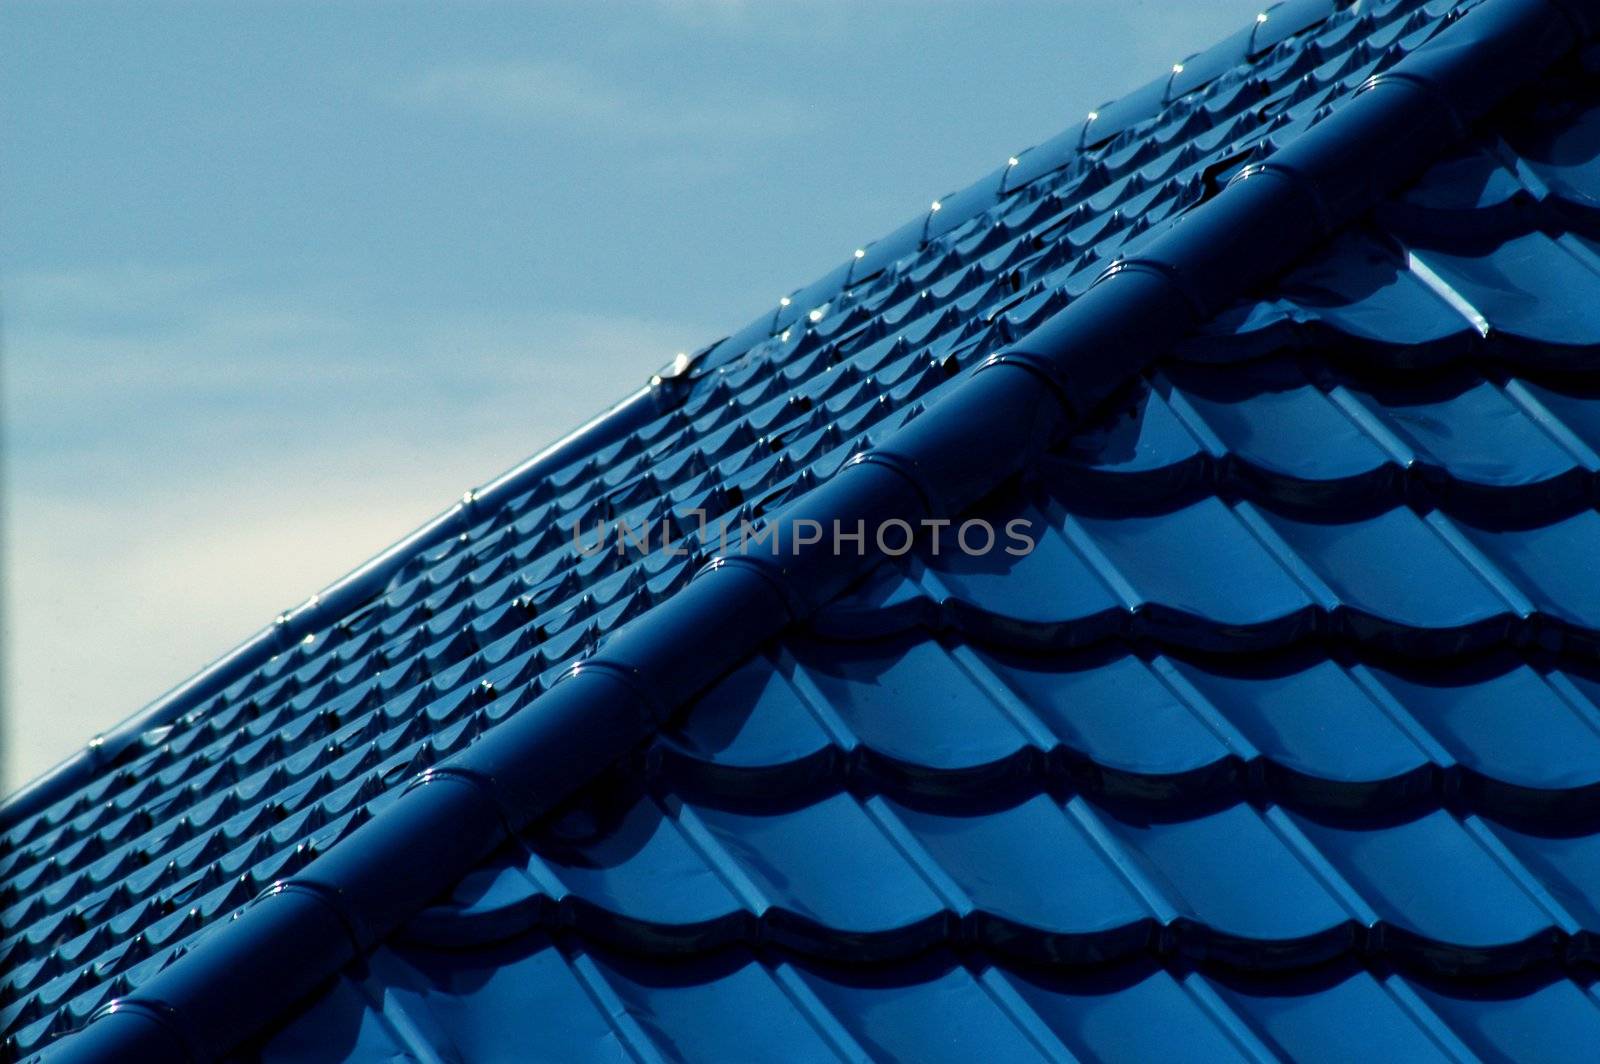  pattern of blue roof tiles